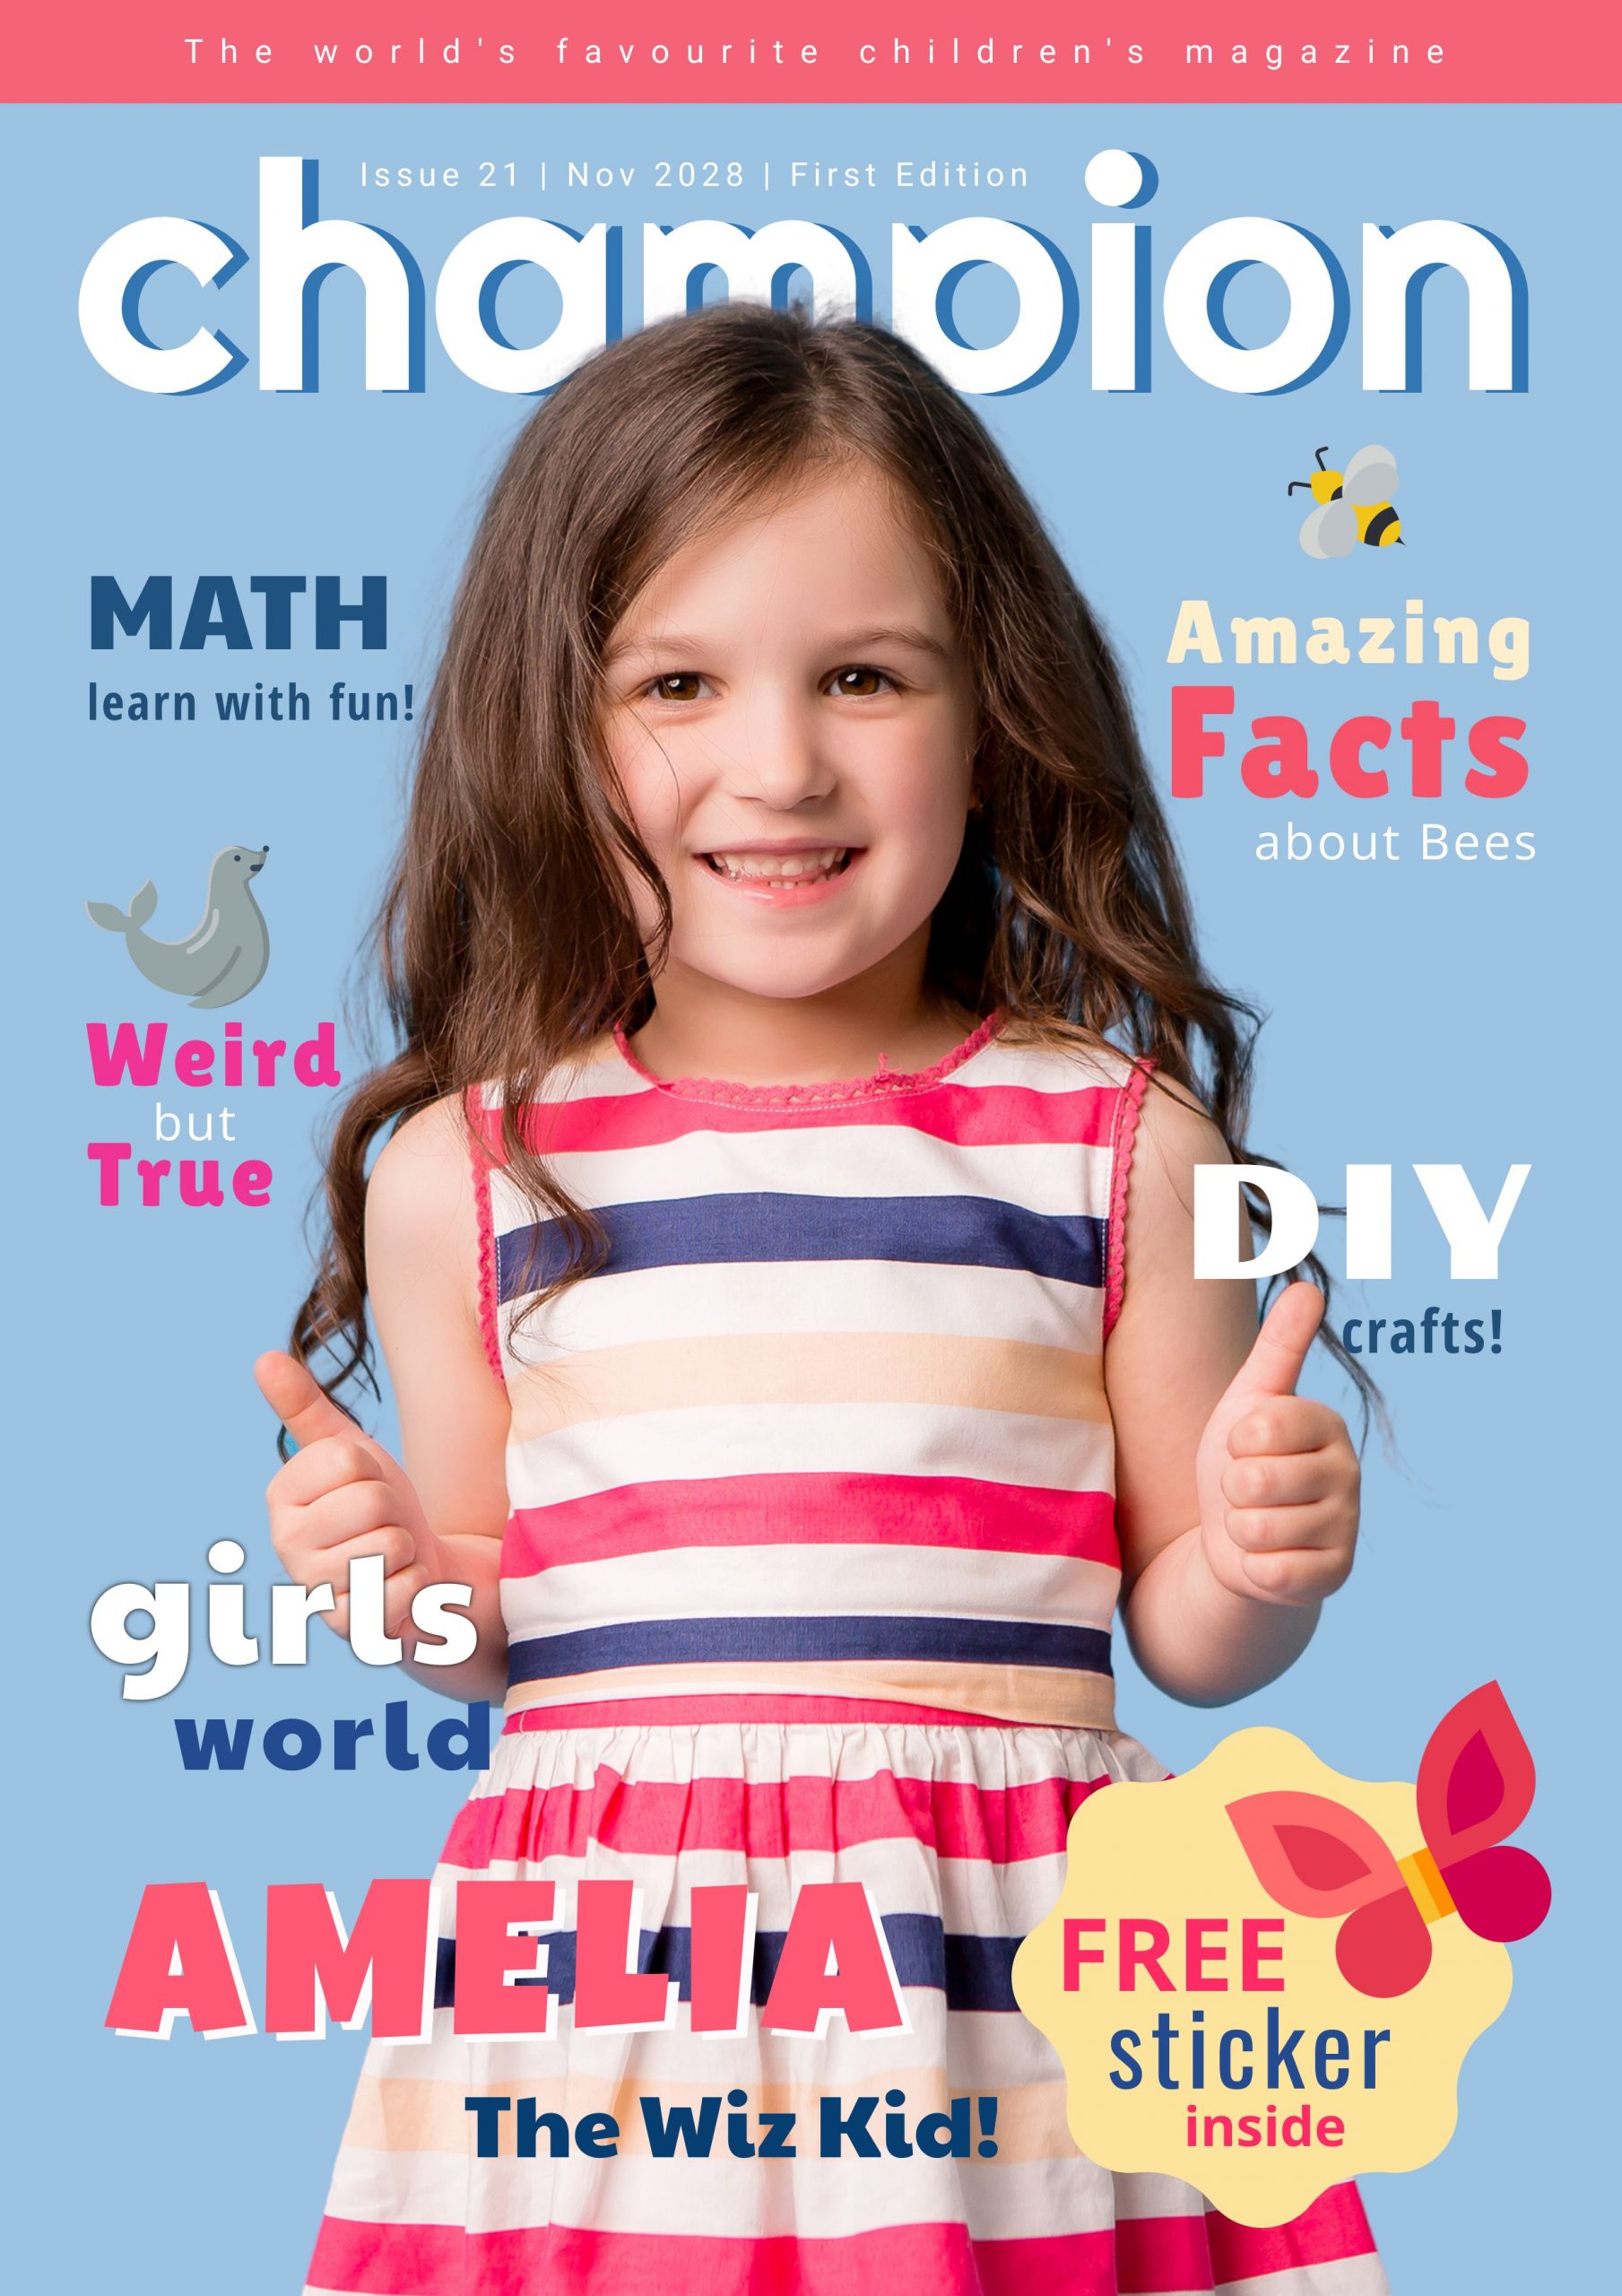 School Magazine Cover Page For Kids